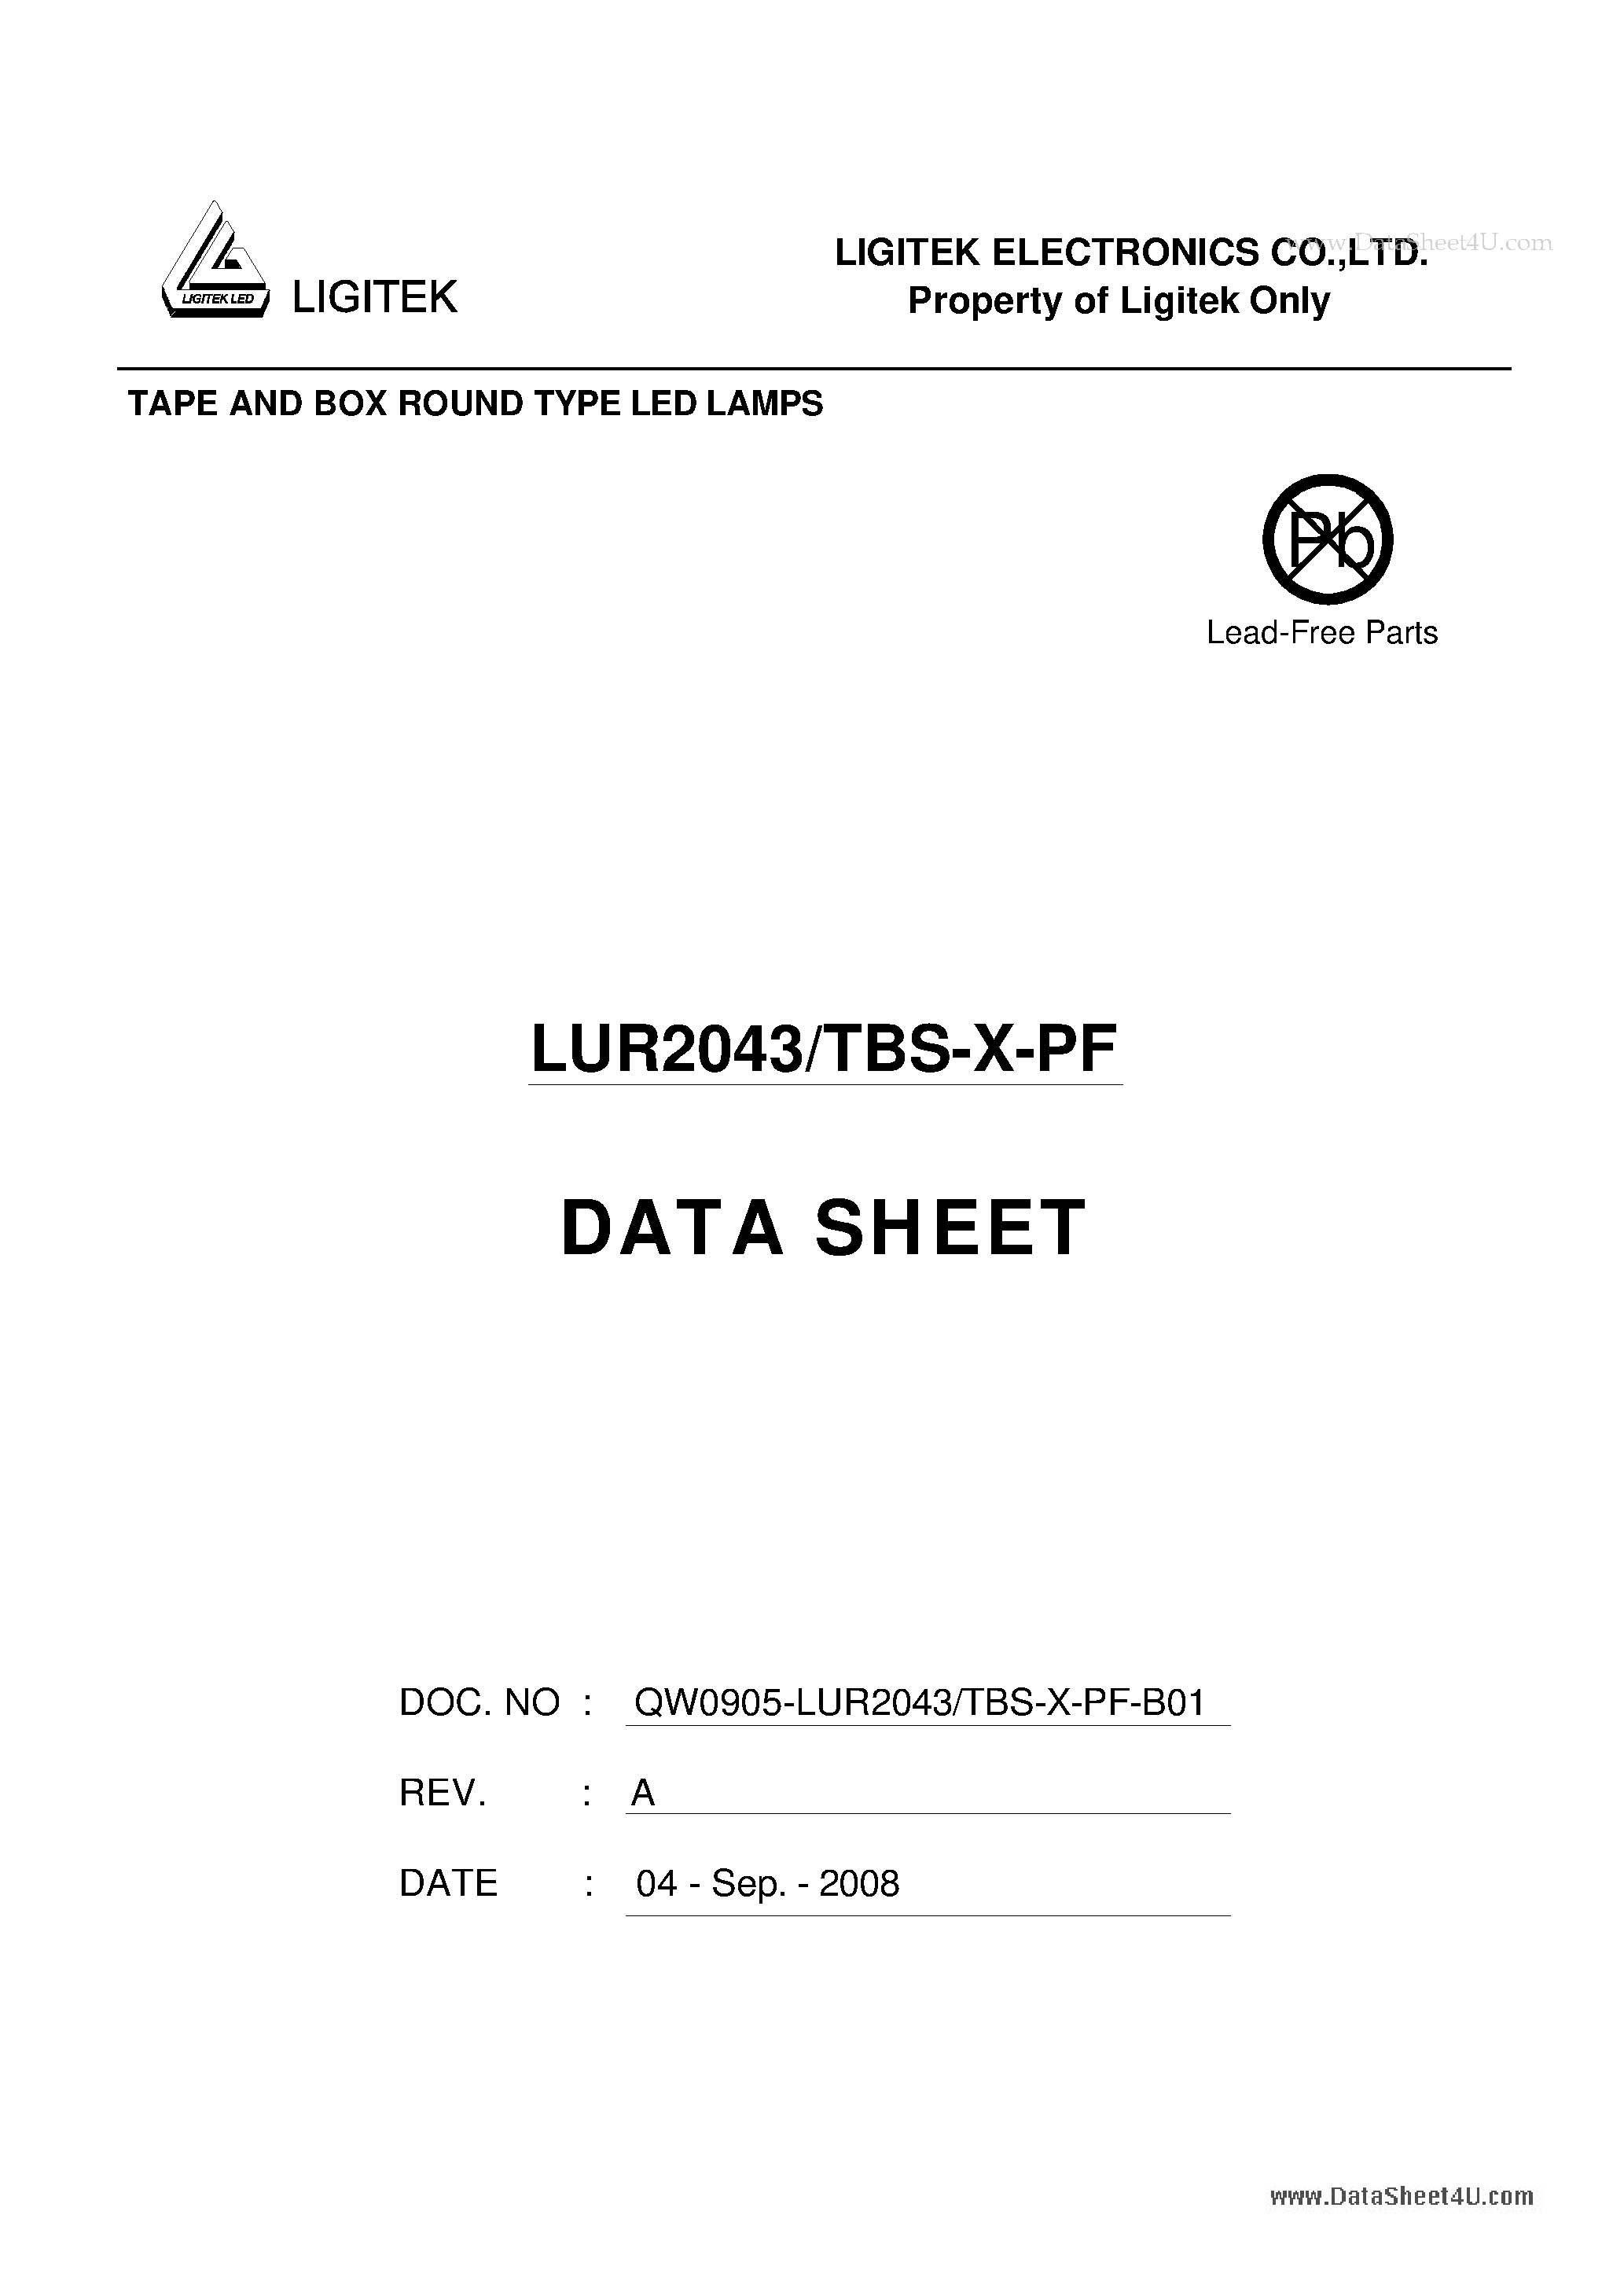 Datasheet LUR2043-TBS-X-PF - SUPER BRIGHT ROUND TYPE LED LAMPS page 1